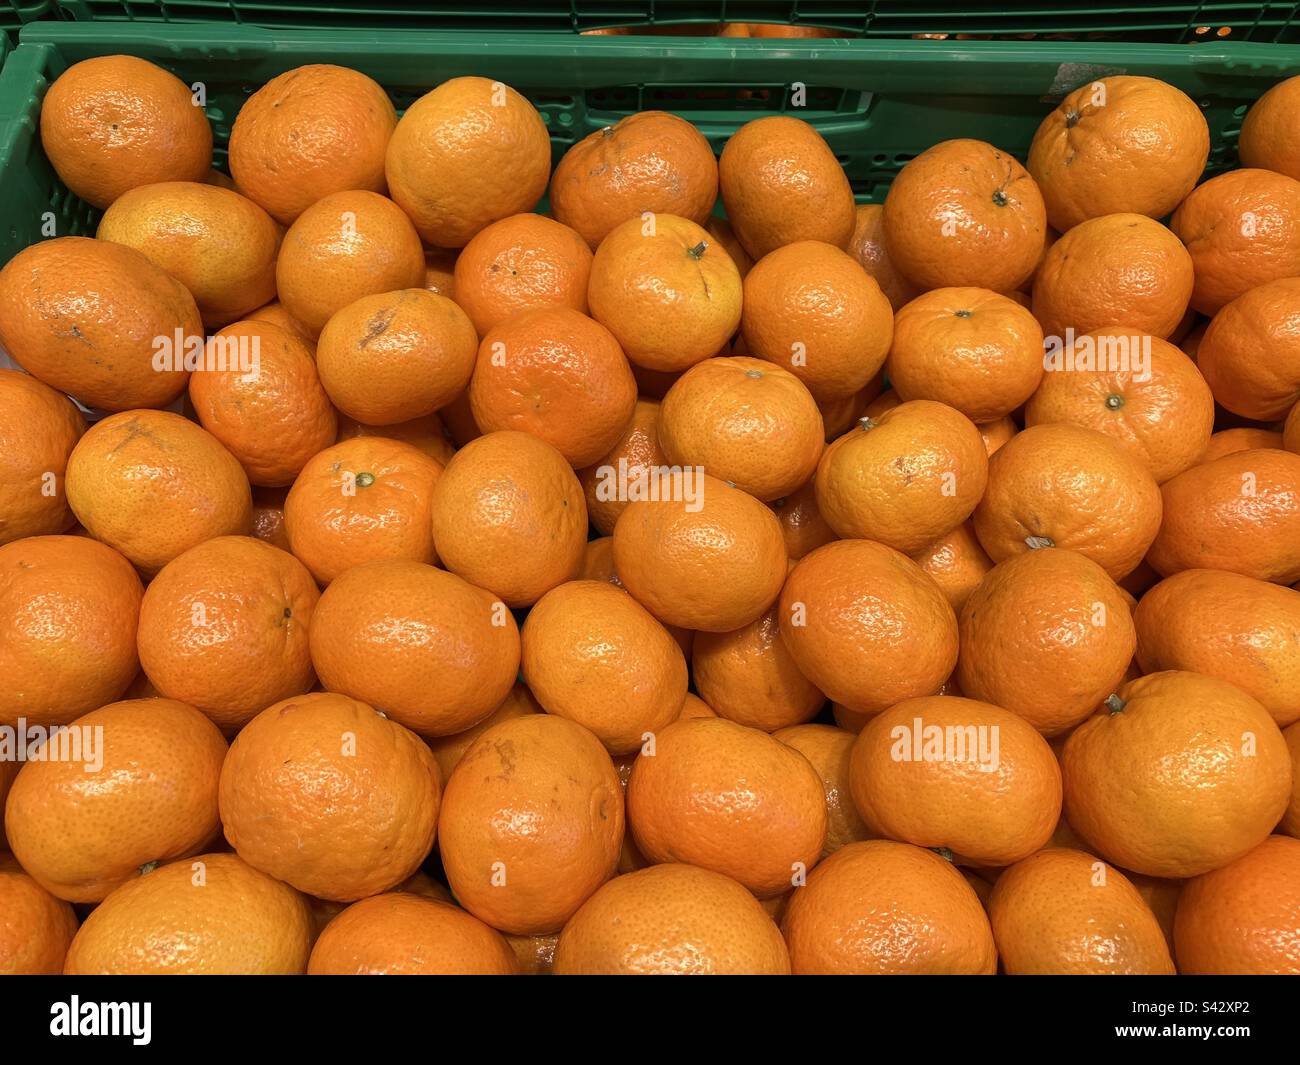 Organic fresh tangerine oranges on display for sale in a supermarket, Alicante Province, Spain Stock Photo